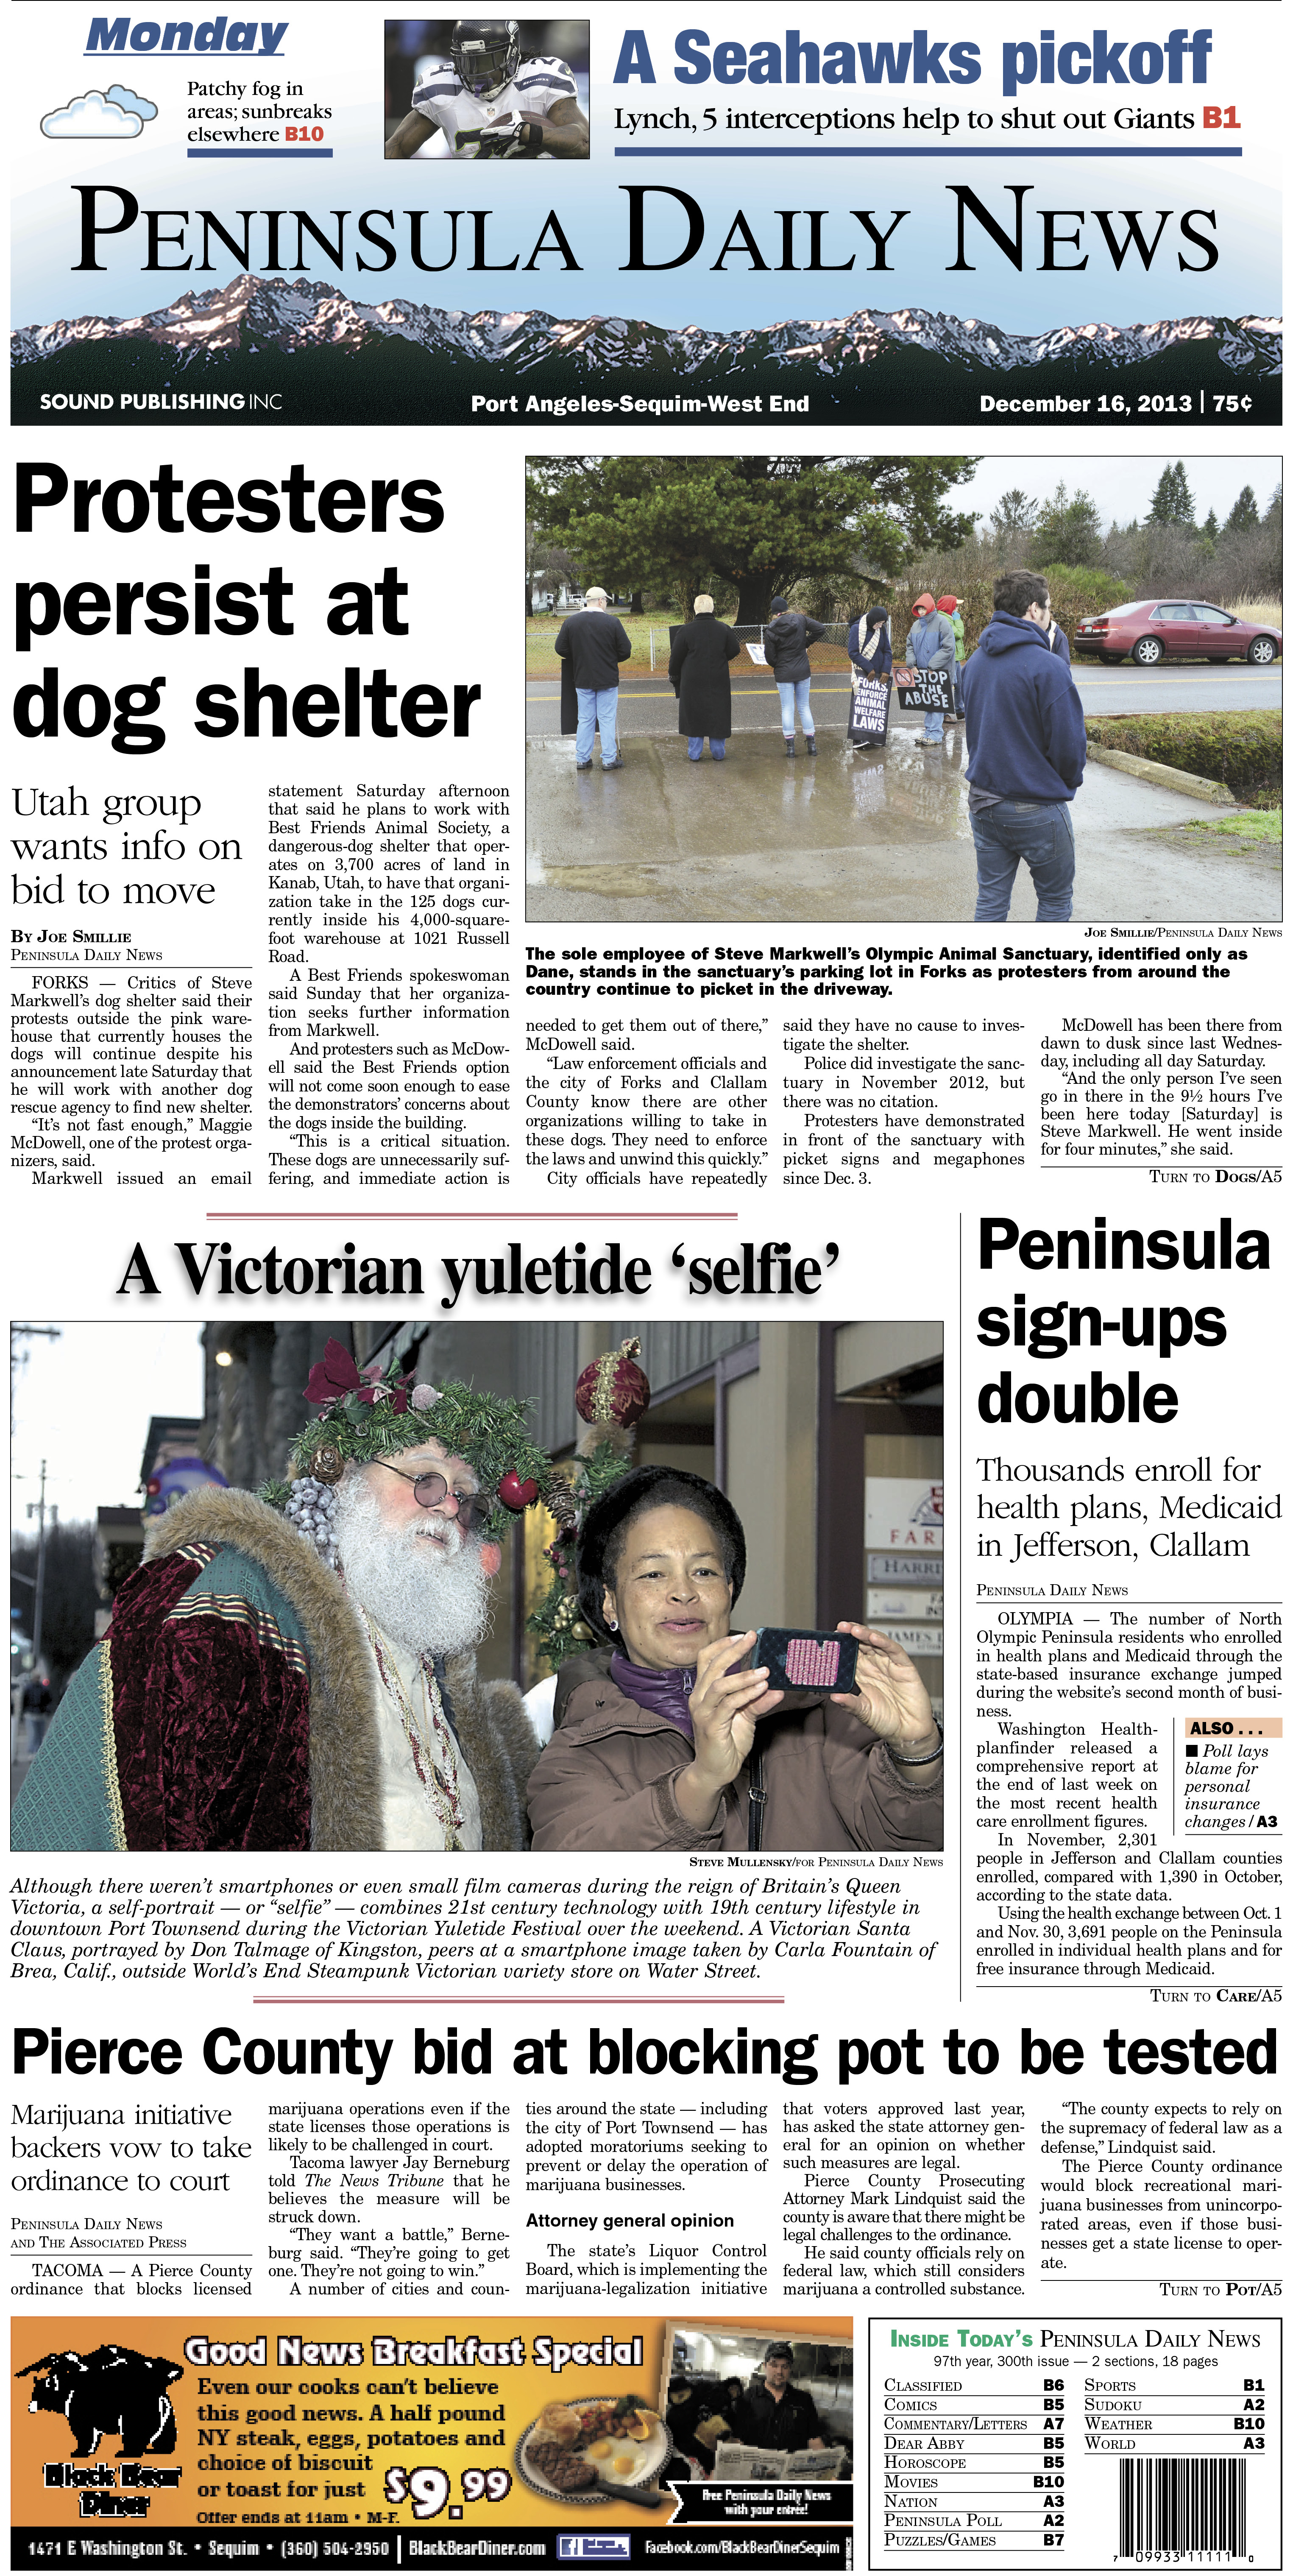 PDN's front page today.